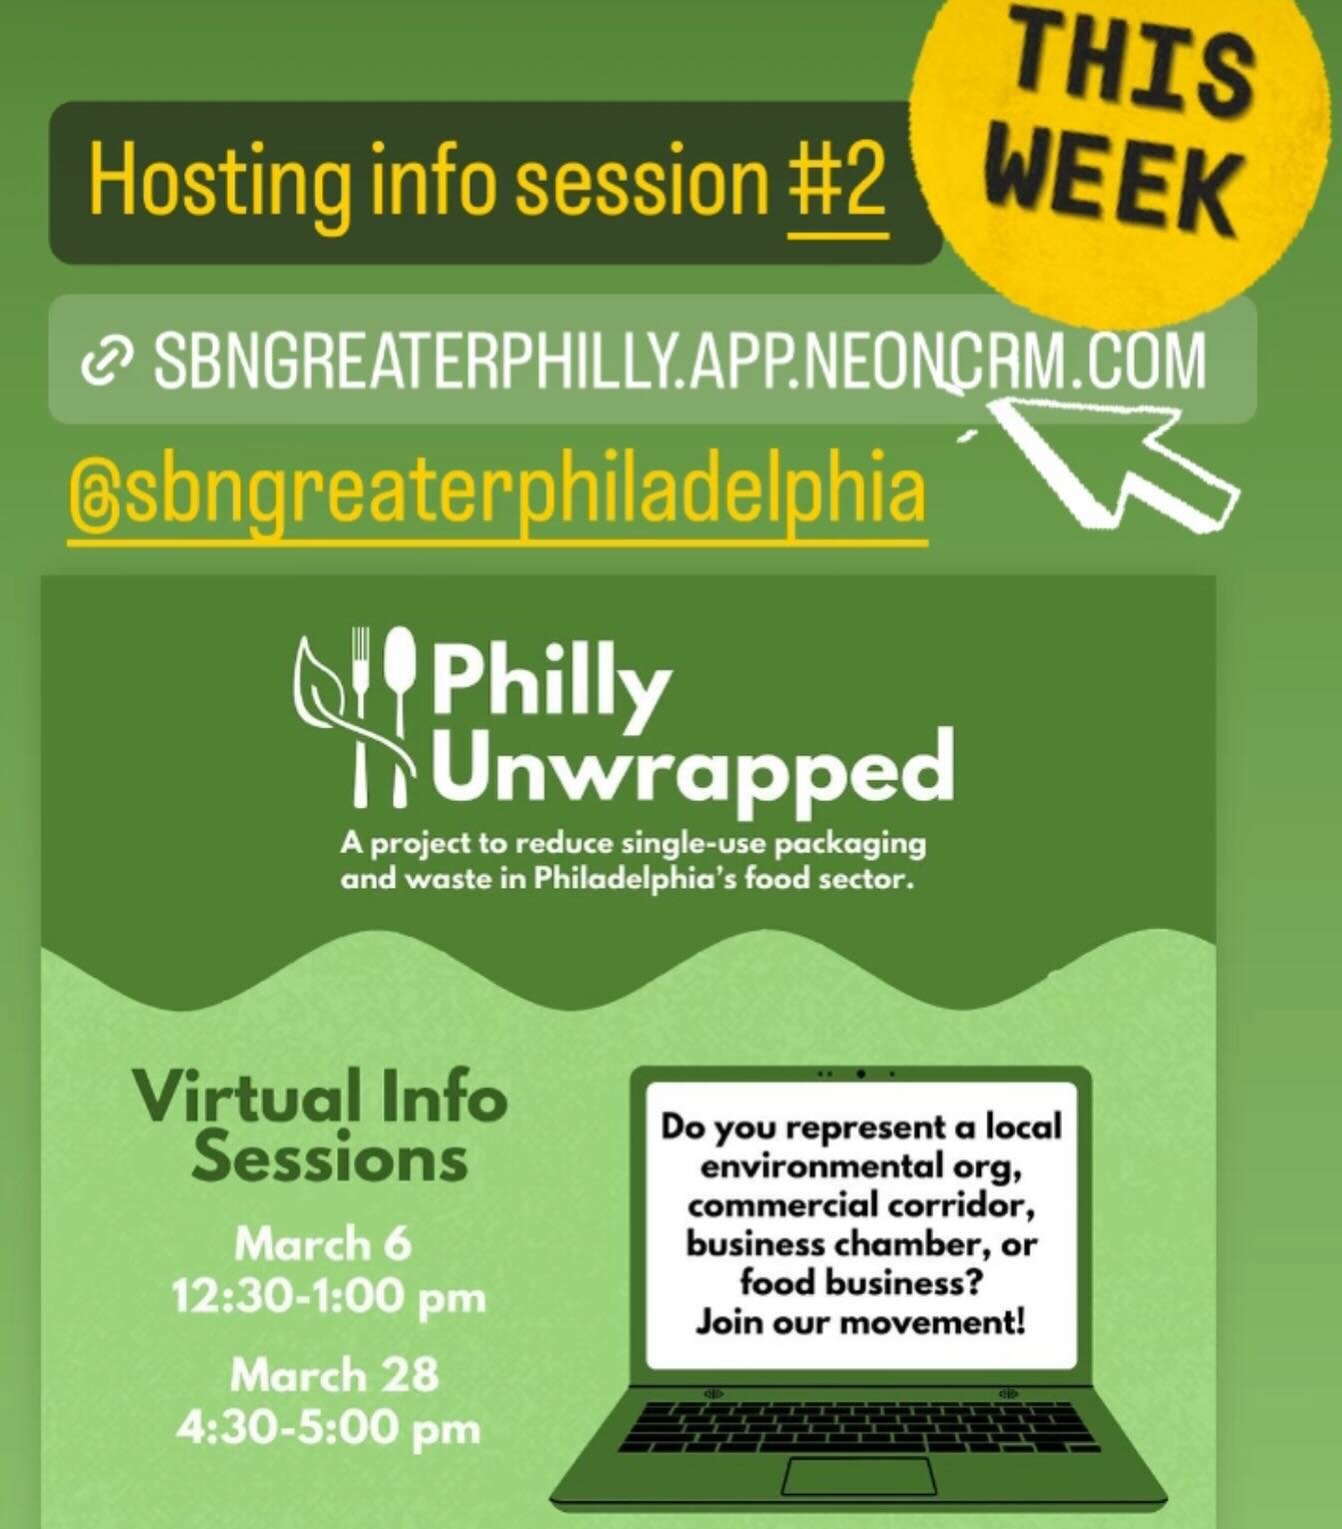 Join us for the second Philly Unwrapped info session. If you are a local commercial corridor business development coordinator, NAC, community leader, CDC, food business owner or government official. This program will benefit you. Find the link in our